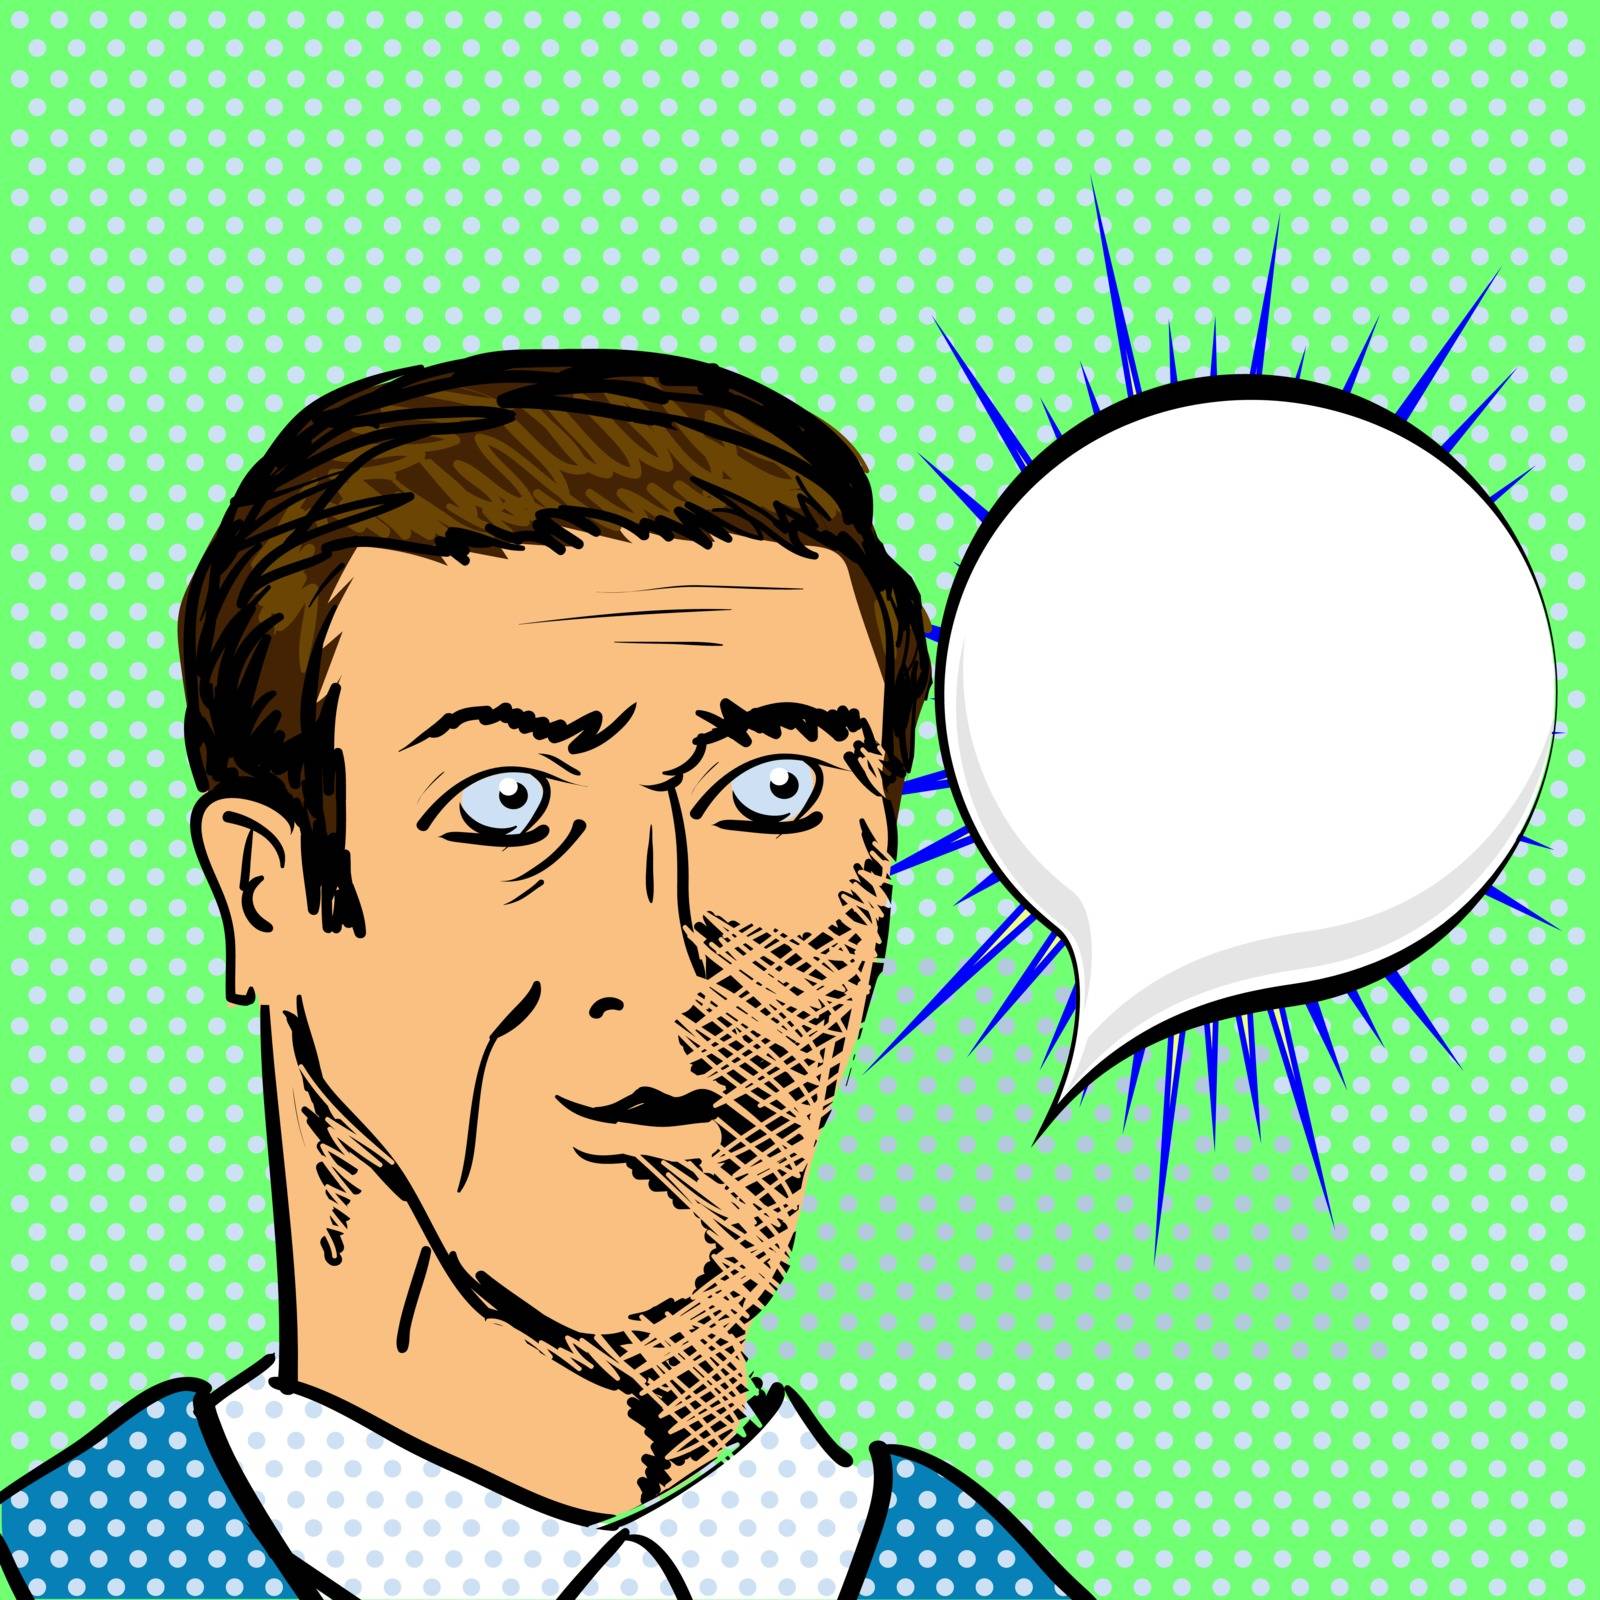 Adult Man Says in a Pop Art Style on Green Dotted Background